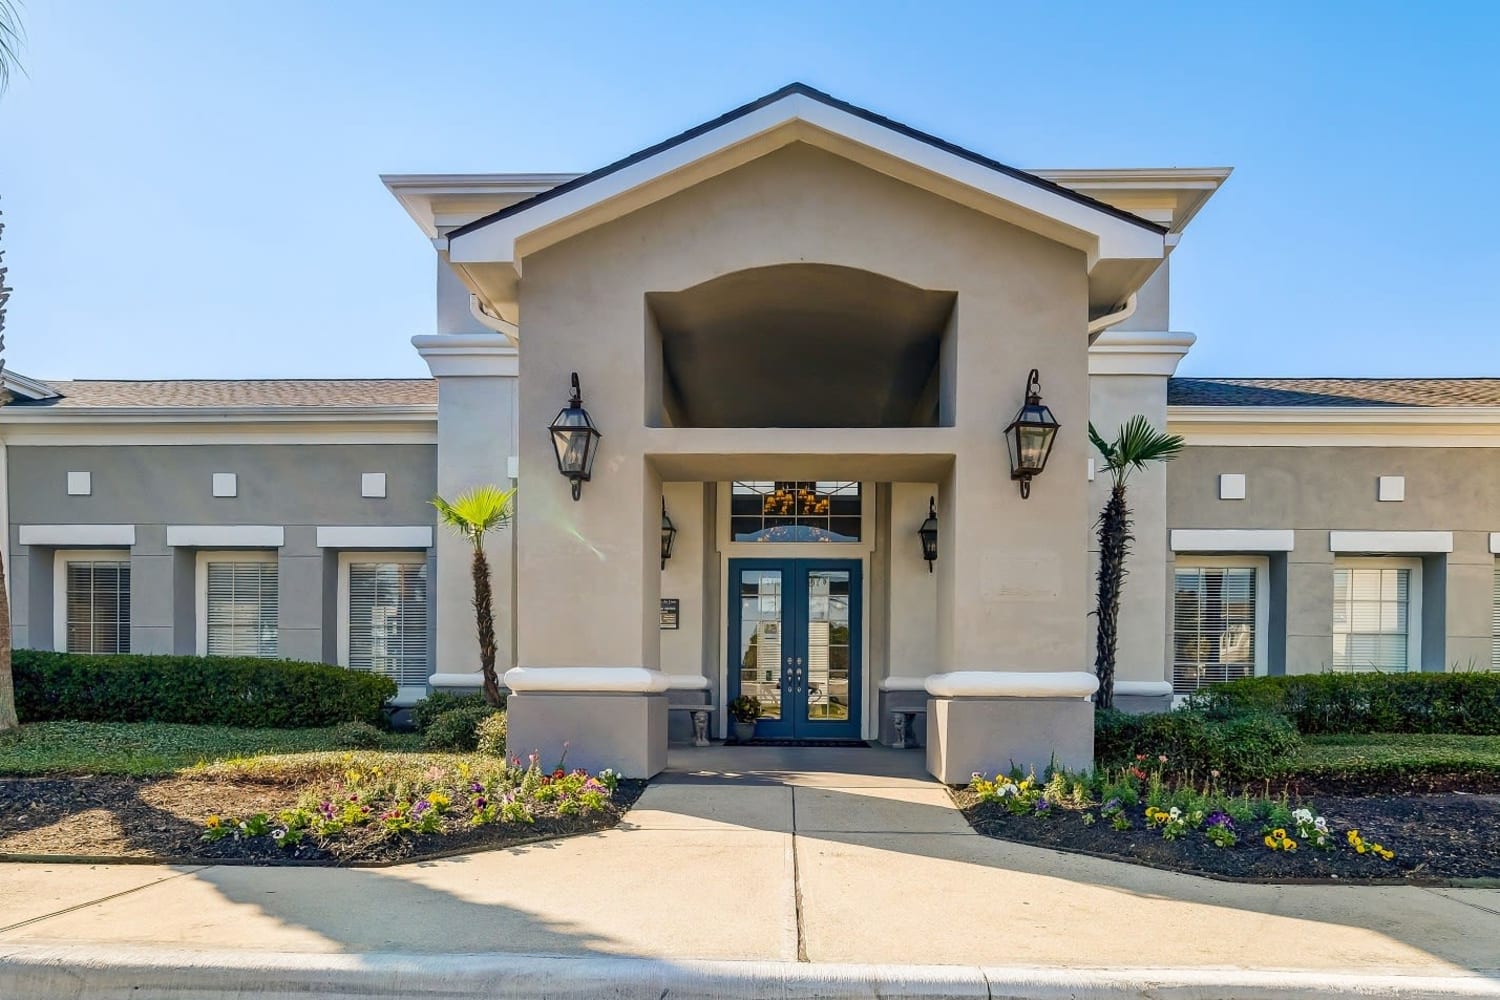 Exterior view of leasing office at Chateau des Lions Apartment Homes in Lafayette, Louisiana